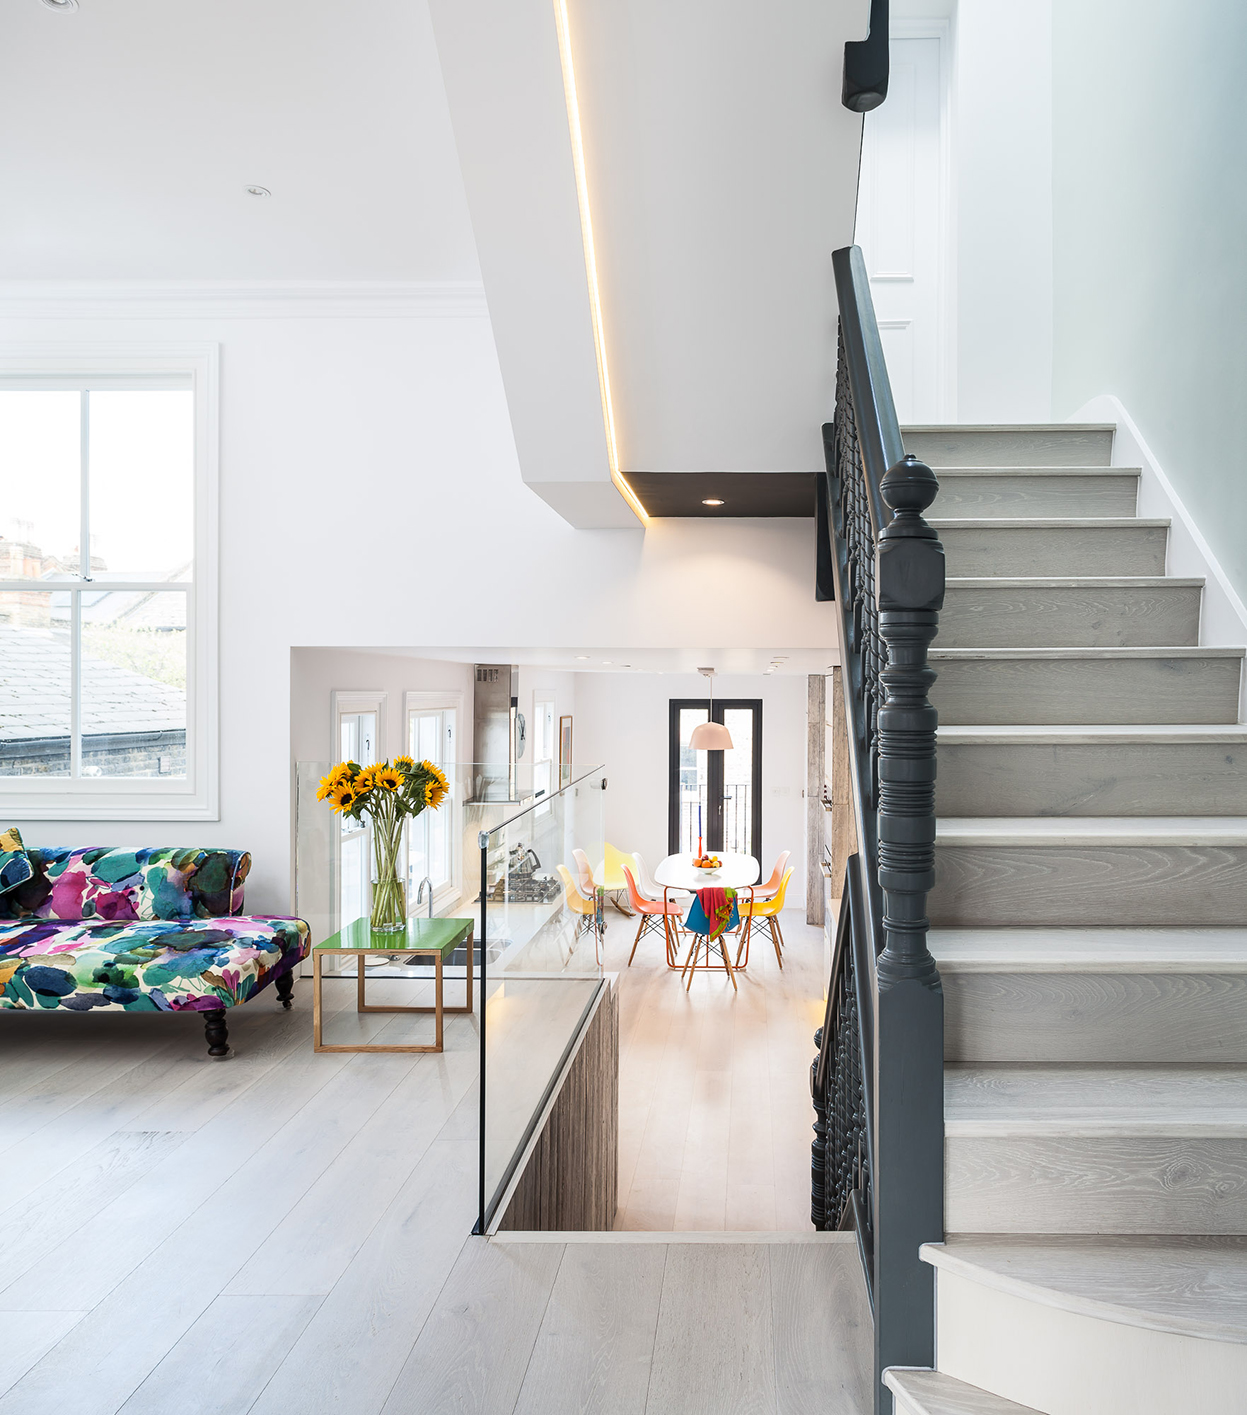 </p> <p>Find your ideal home design pro on designfor-me.com - get matched and see who's interested in your home project. Click image to see more inspiration from our design pros</p> <p>Design by Peter, architect from Islington, London</p> <p>#architecture #homedesign #modernhomes #homeinspiration #hallways #hallwaydesign #hallwayinspiration #hallwayideas #hallwaydesignideas #staircases #staircasedesign #staircaseinspiration #staircaseideas #staircasedesignideas </p> <p>